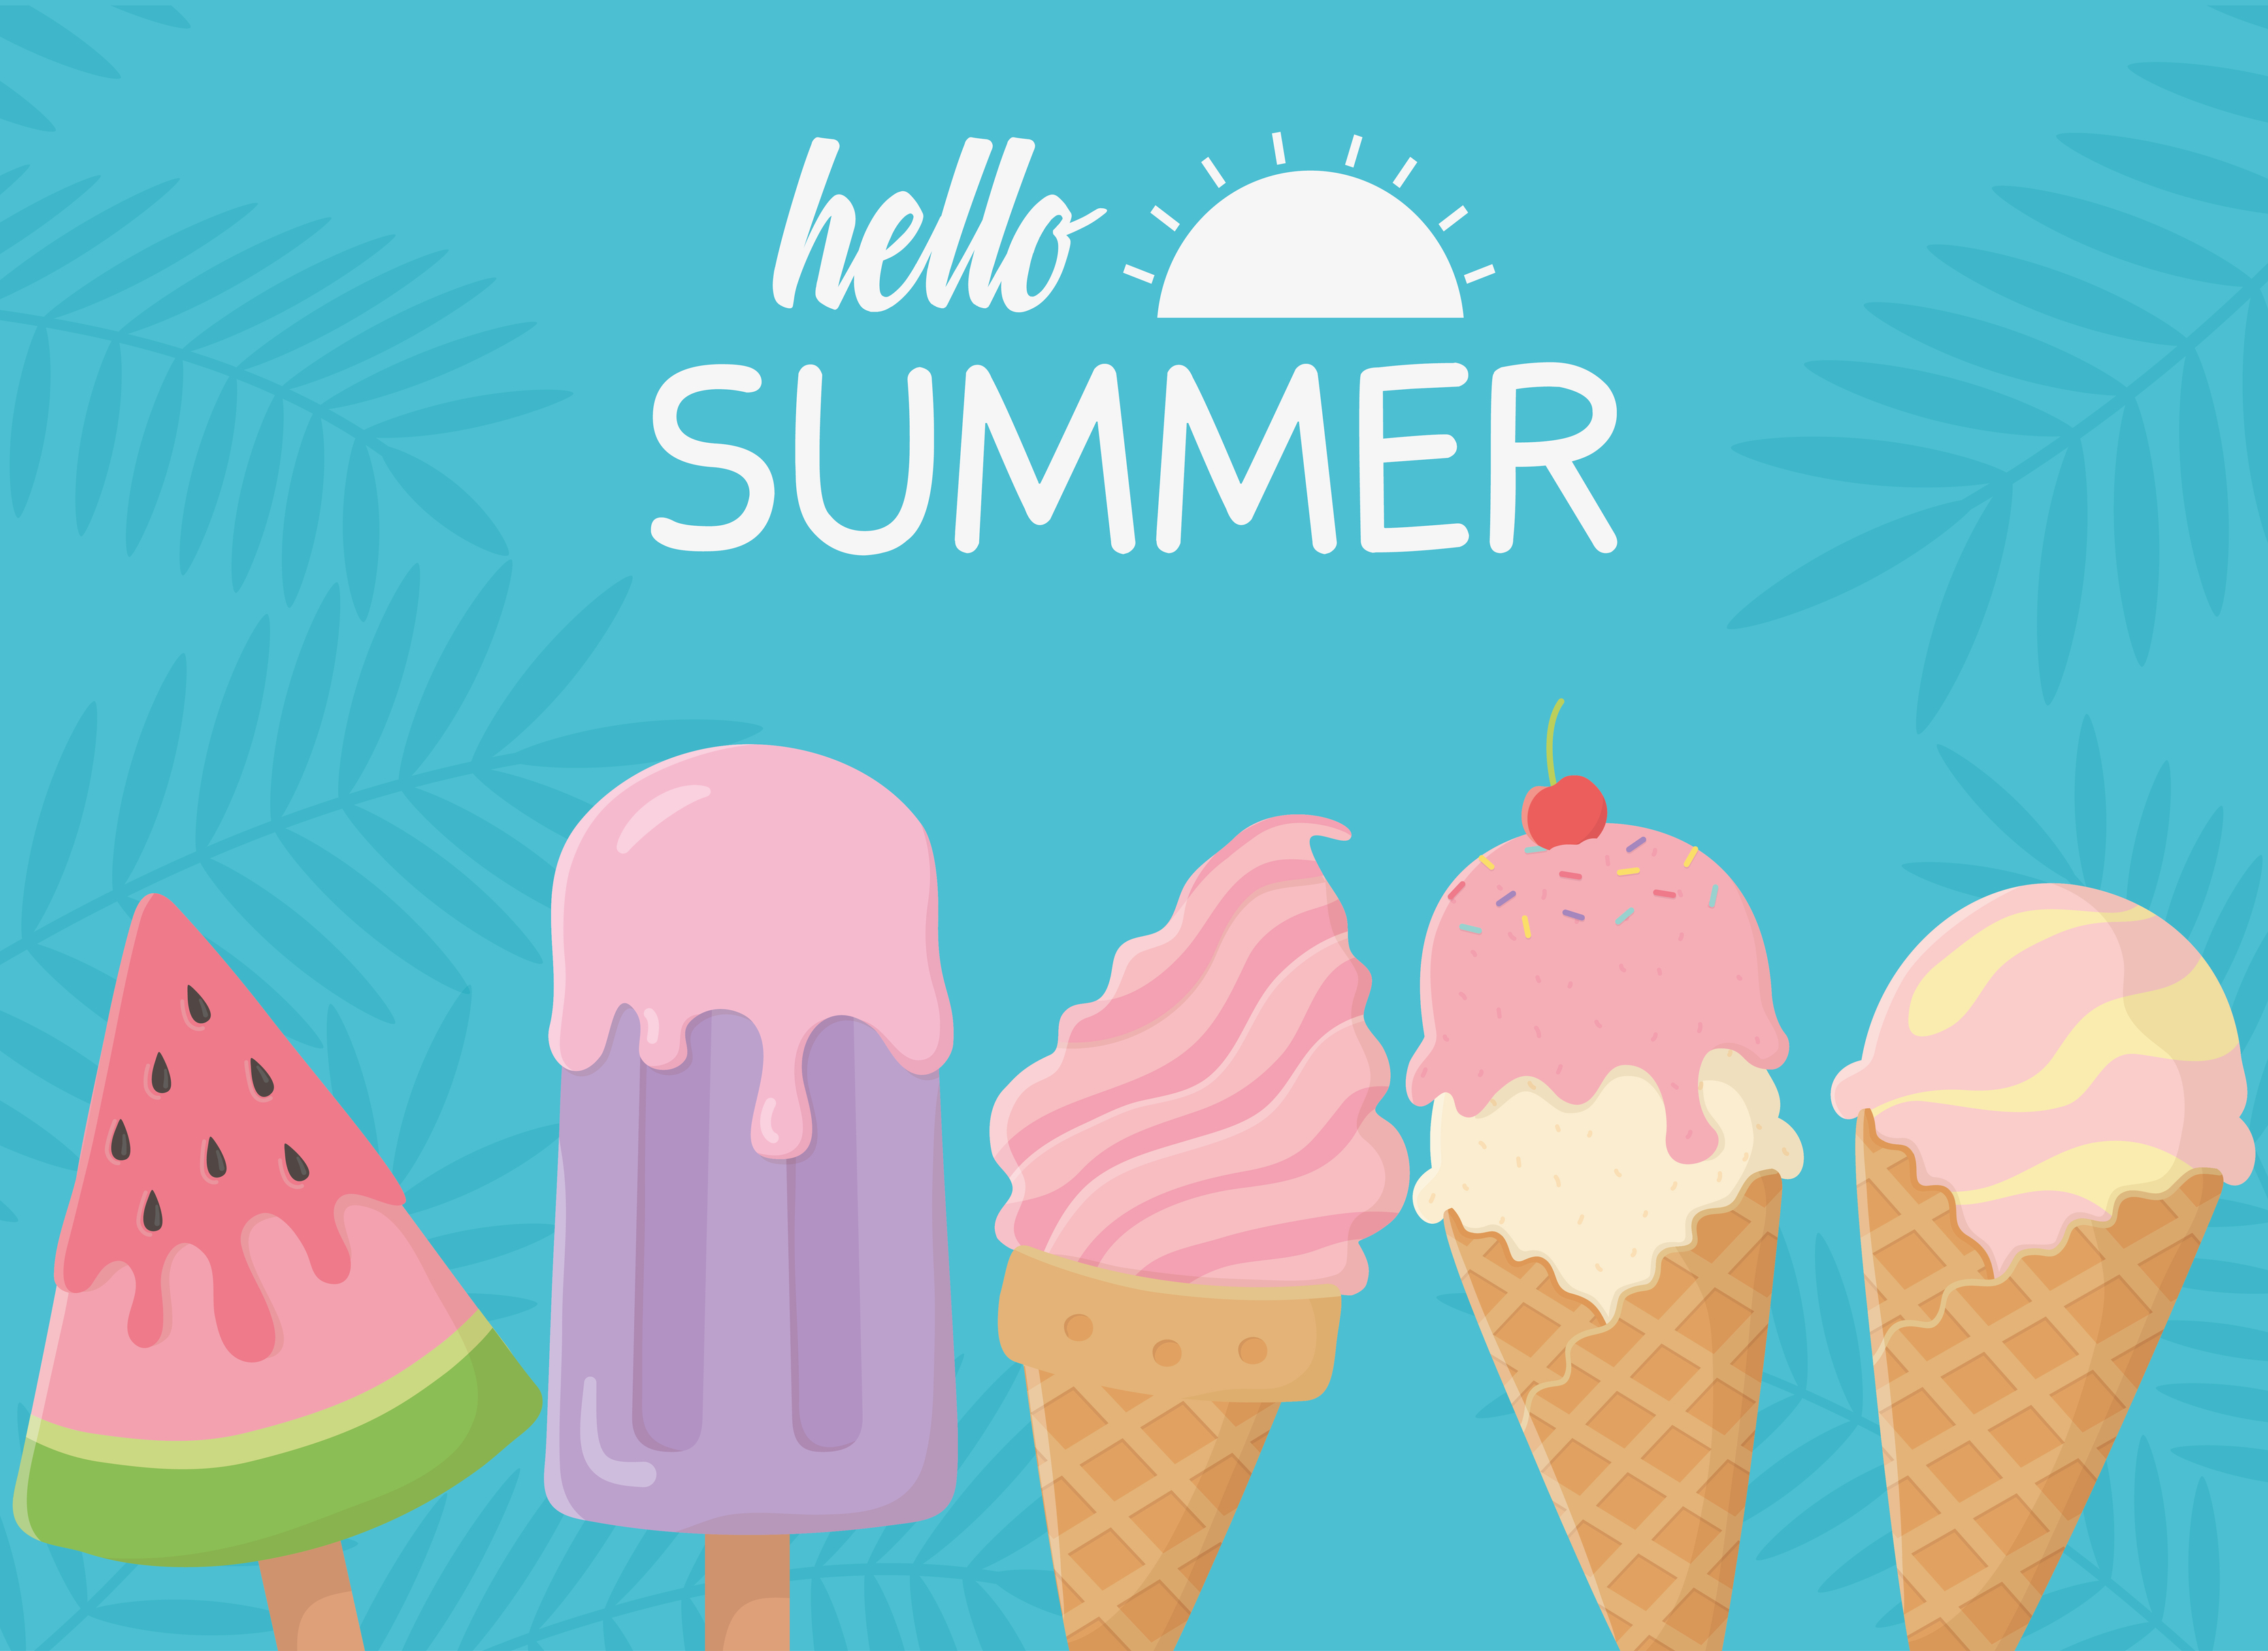 Technologys impact on your summer ice cream parlor